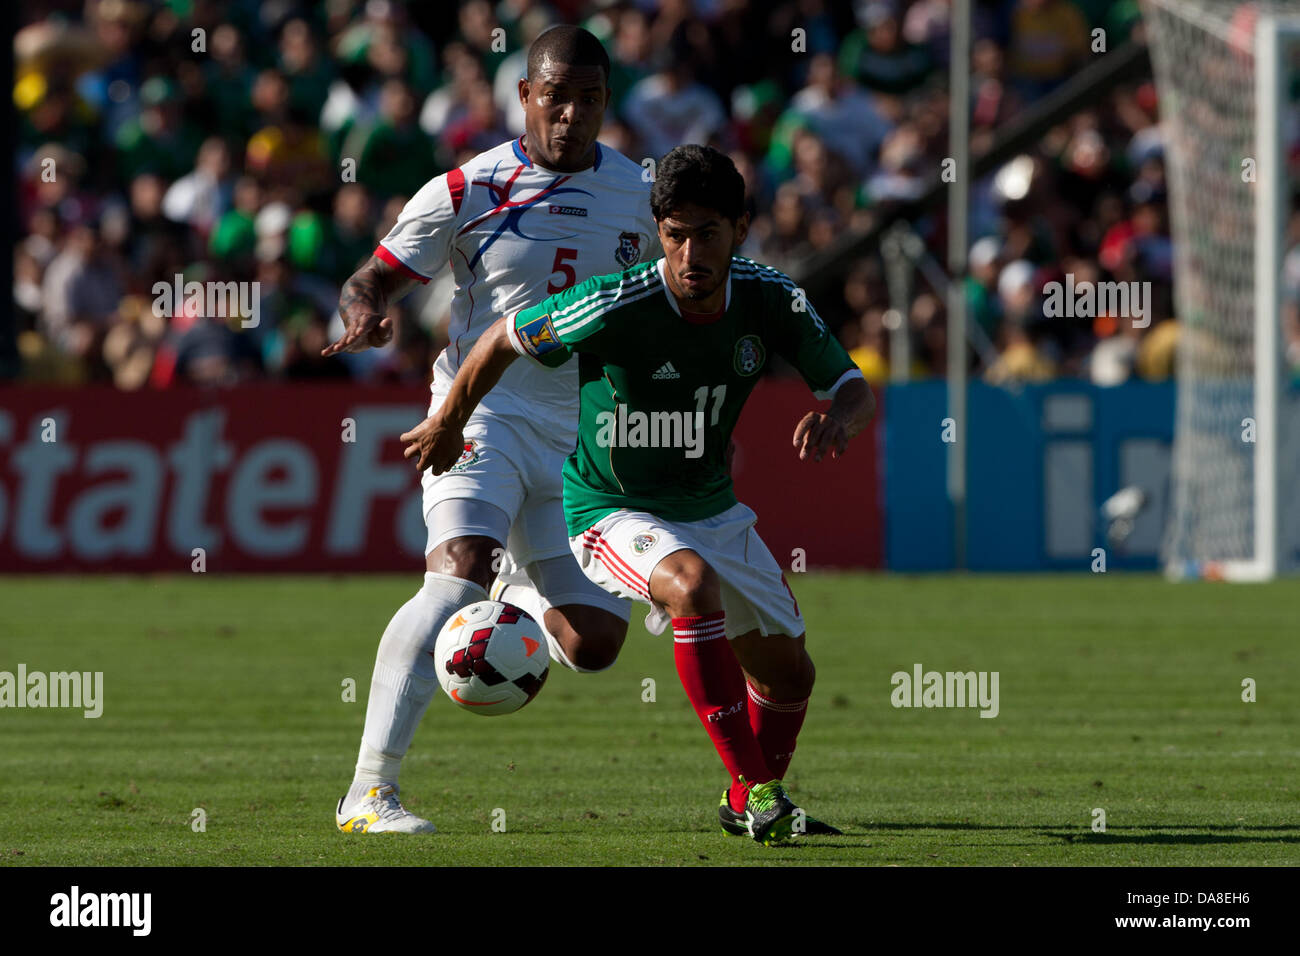 Pasadena, California, USA. 7th July, 2013. Rafael Marquez #11 of Mexico and Roman Torres #5 of Panama in action during the 2013 CONCACAF Gold Cup game between Mexico and Panama on July 7, 2013 at the Rose Bowl in Pasadena, Ca. Credit:  Brandon Parry / Newsport/Alamy Live News Stock Photo